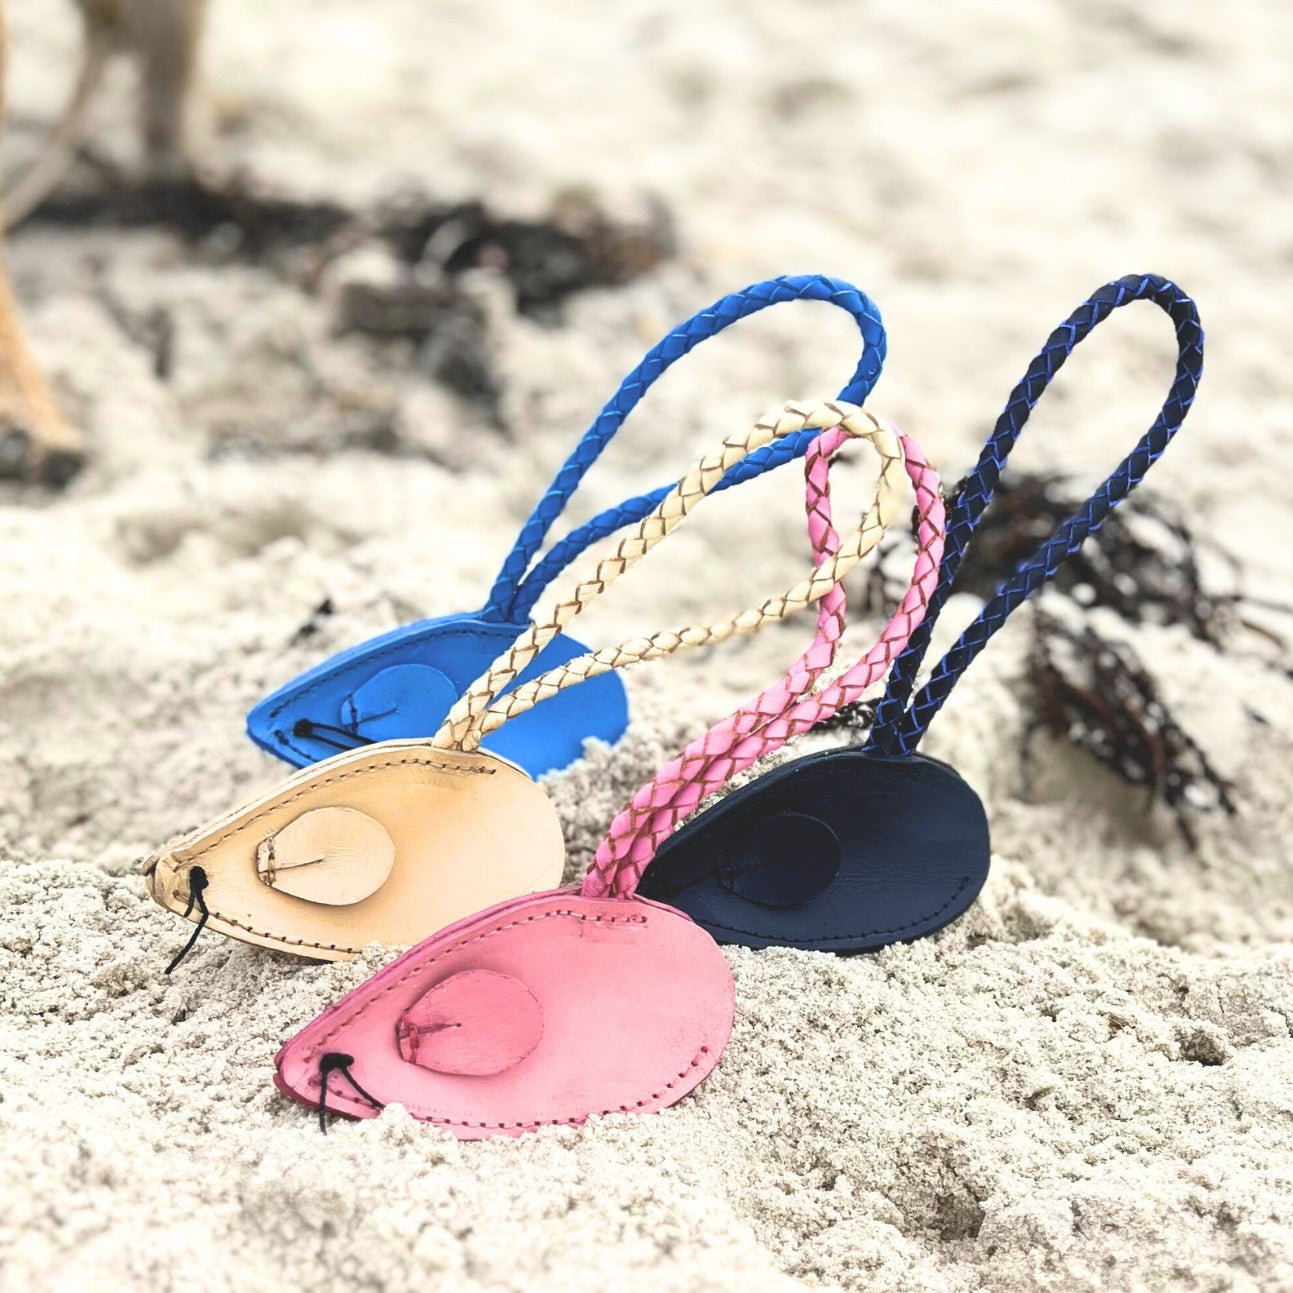 Four colorful Georgie Paws buffalo leather flip-flops with braided straps are playfully stuck upright in sandy beach terrain, evoking a laid-back, beachy vibe.